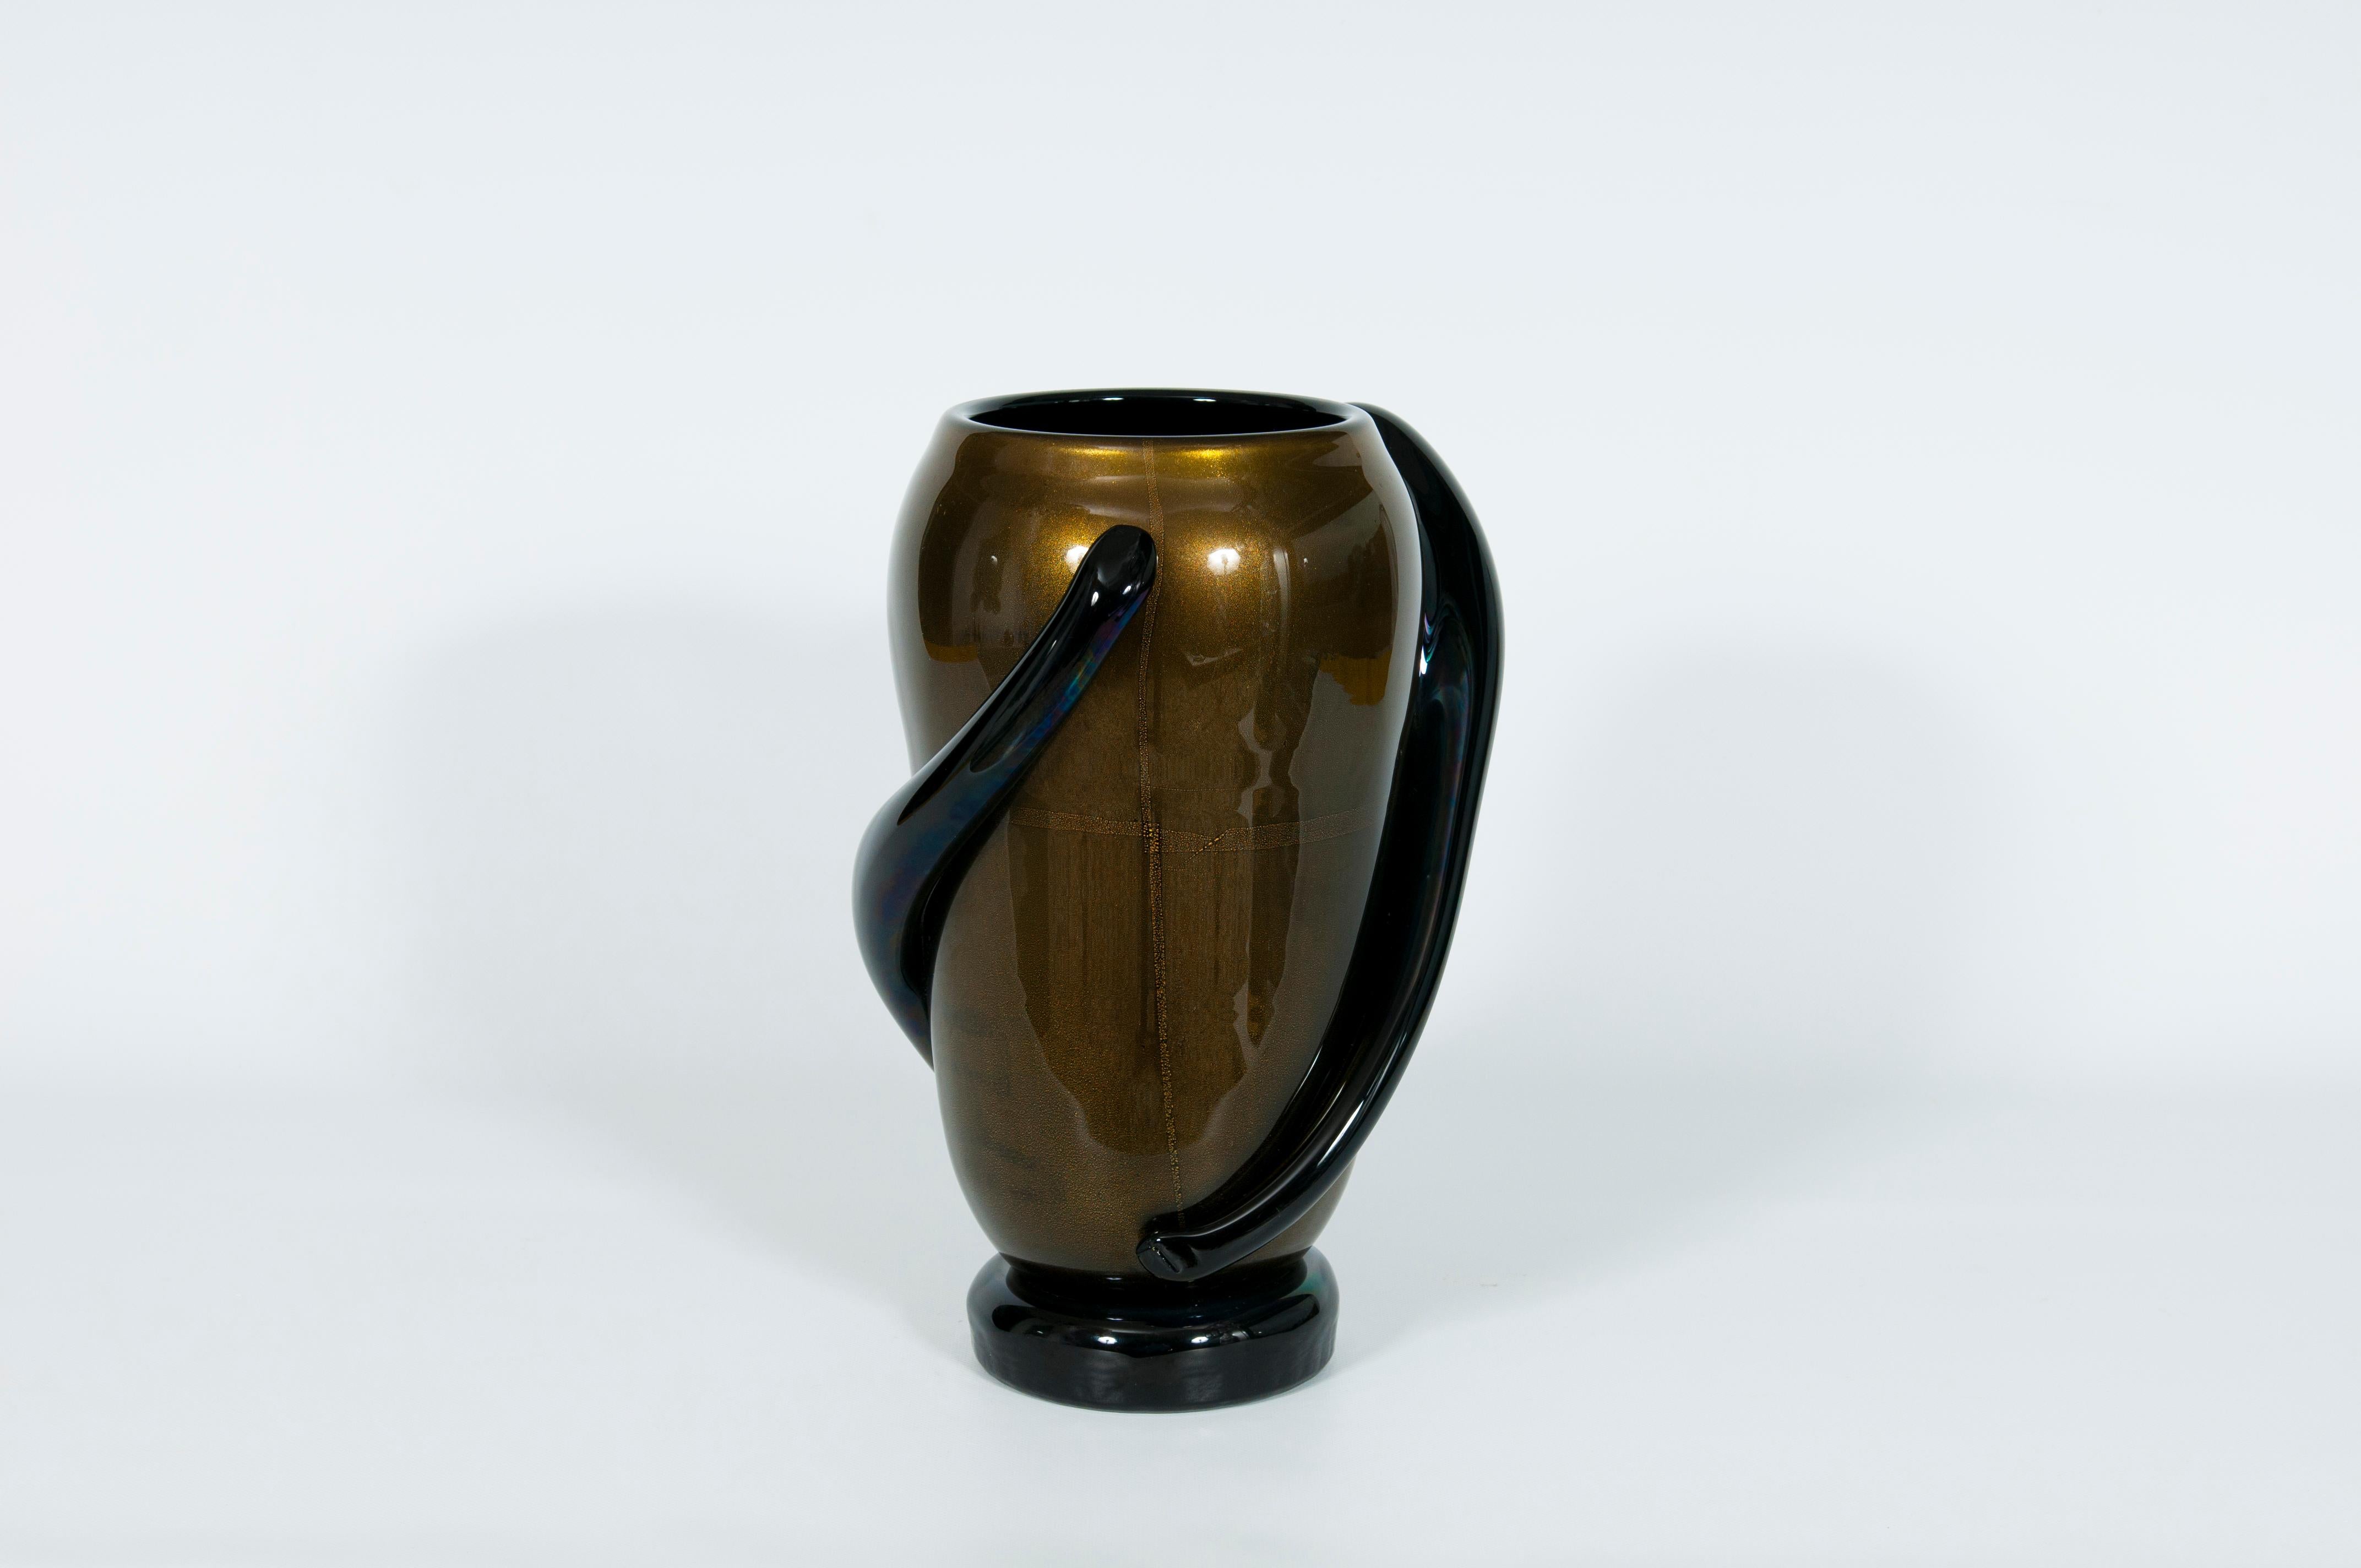 Massive and elegant Italian Venetian, Art Deco vase, blown Murano glass, black and gold 24-karat, 1980s.
This amazing portrait is entirely handcrafted in blown Murano Glass, in the Murano glass island of Venice, its manufacture is date 1980s.
This